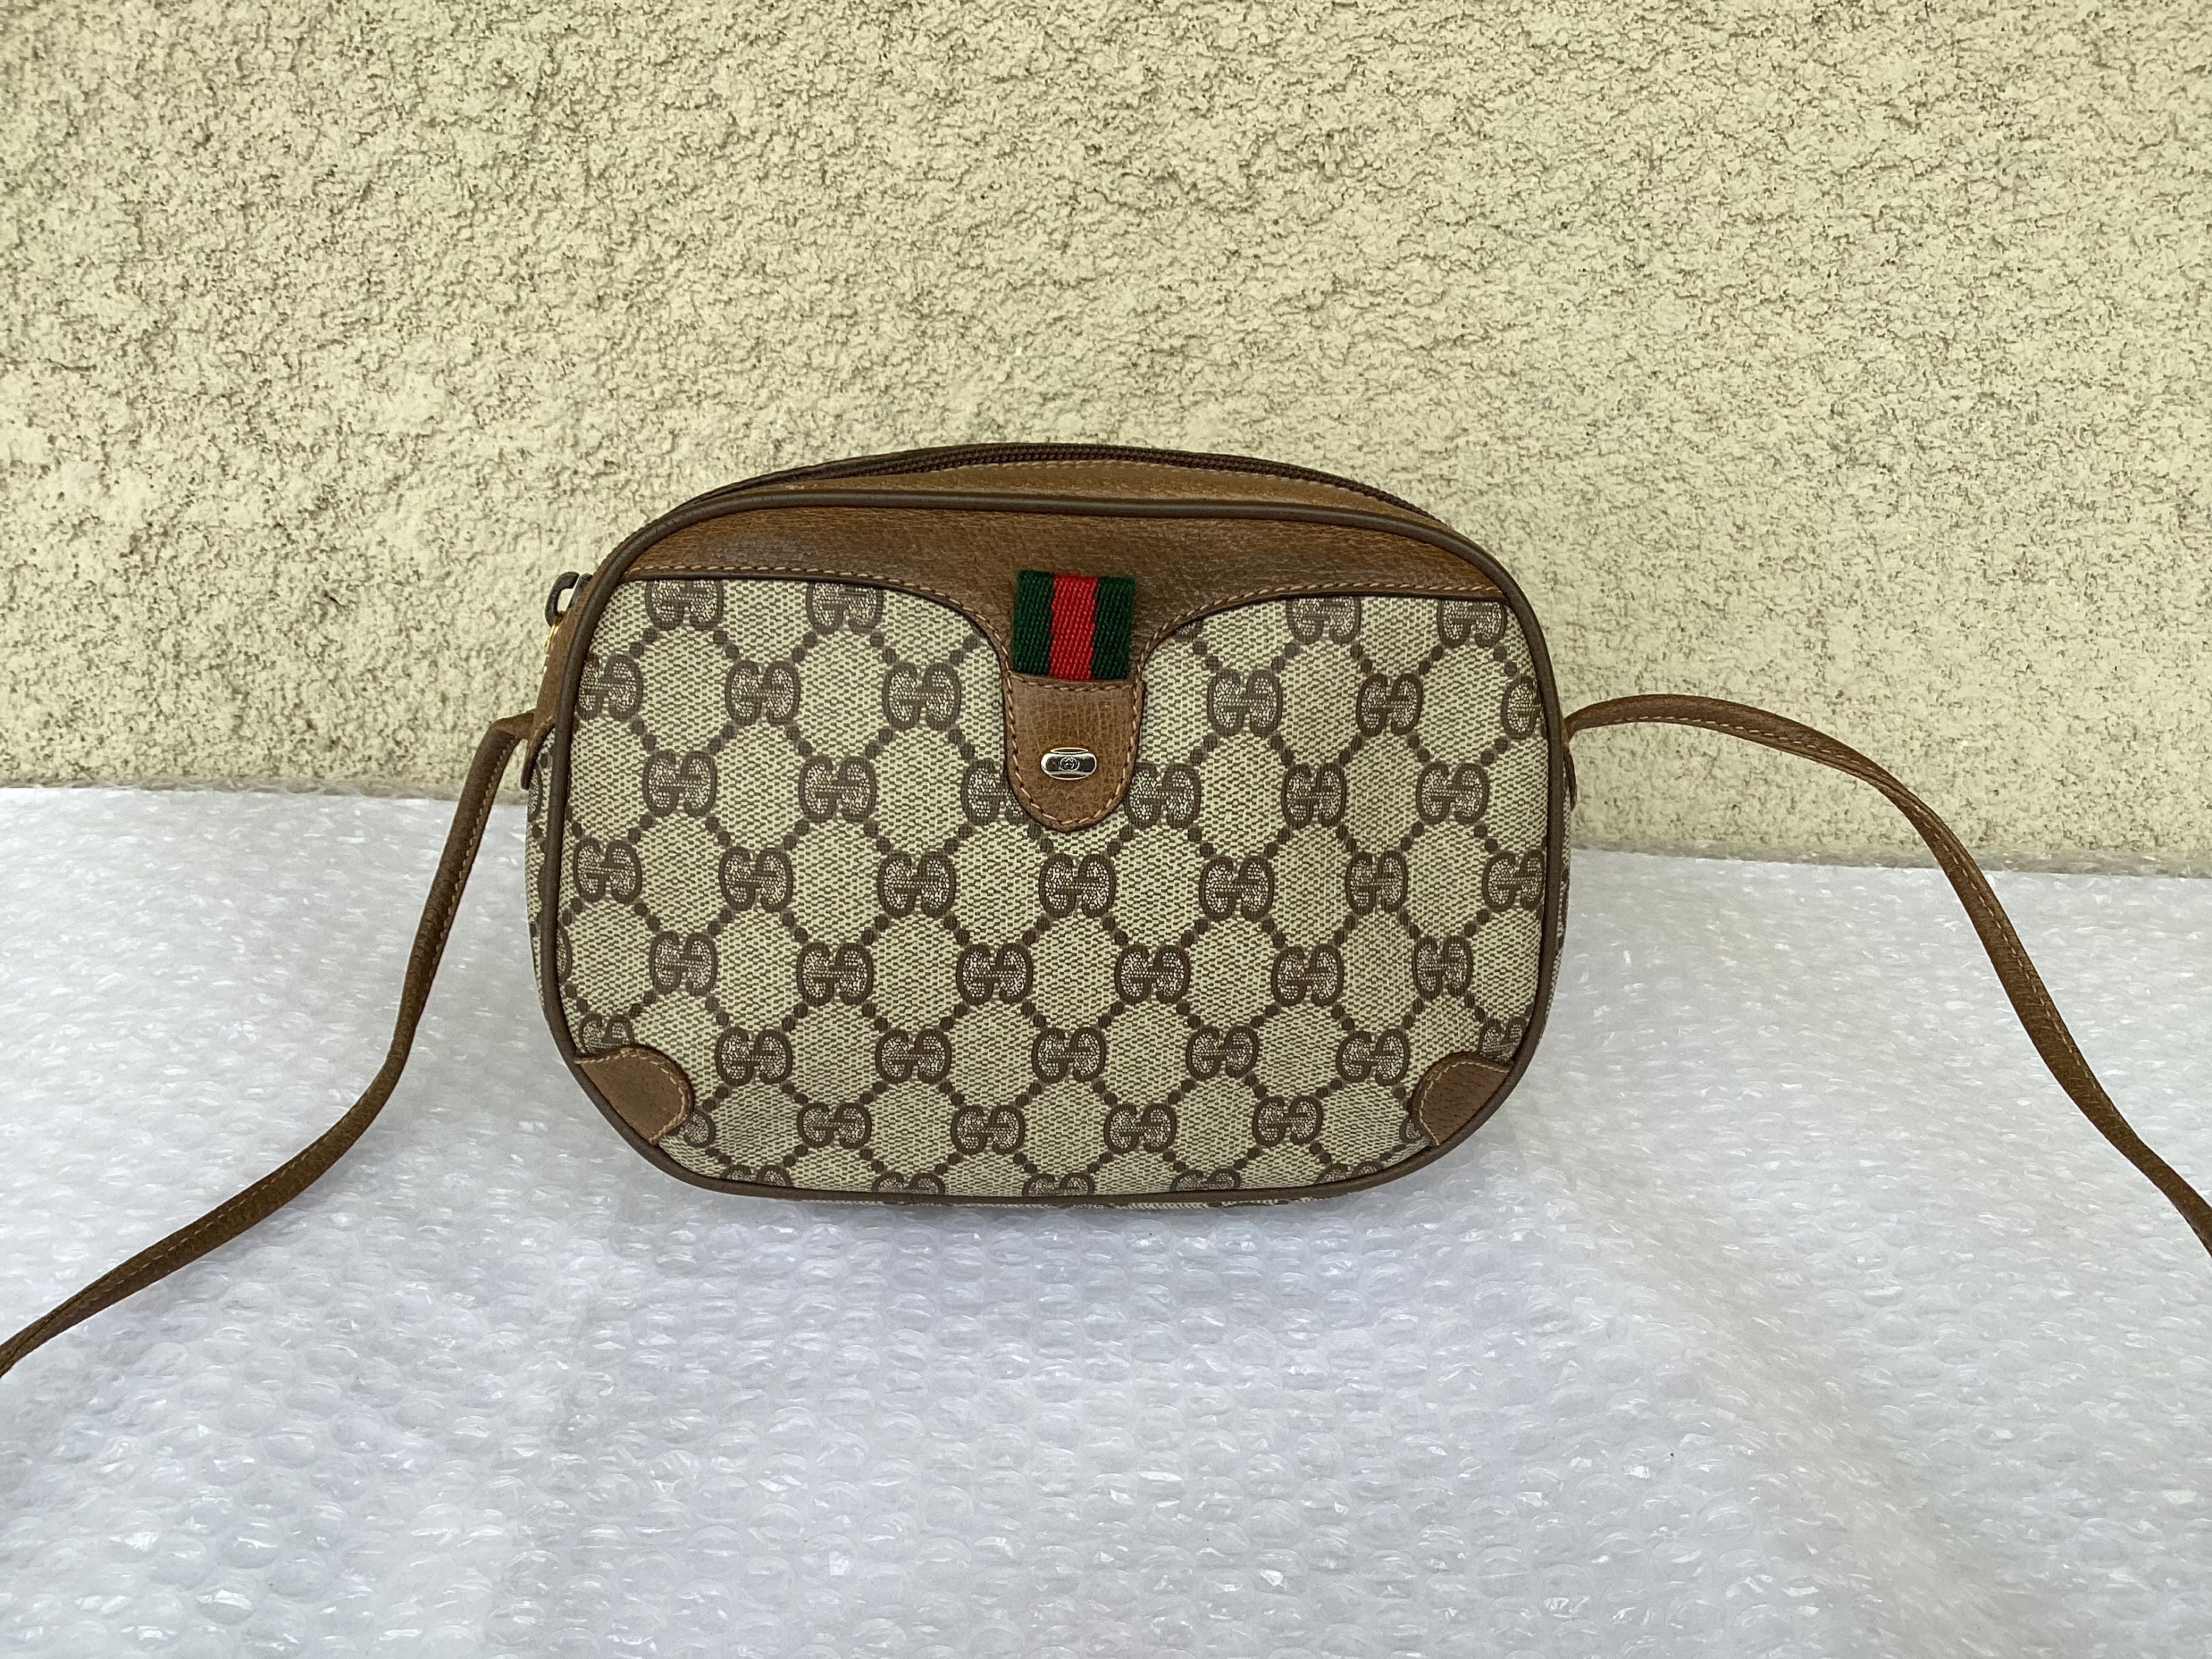 GUCCI GG Retro mini leather-trimmed printed coated-canvas shoulder bag